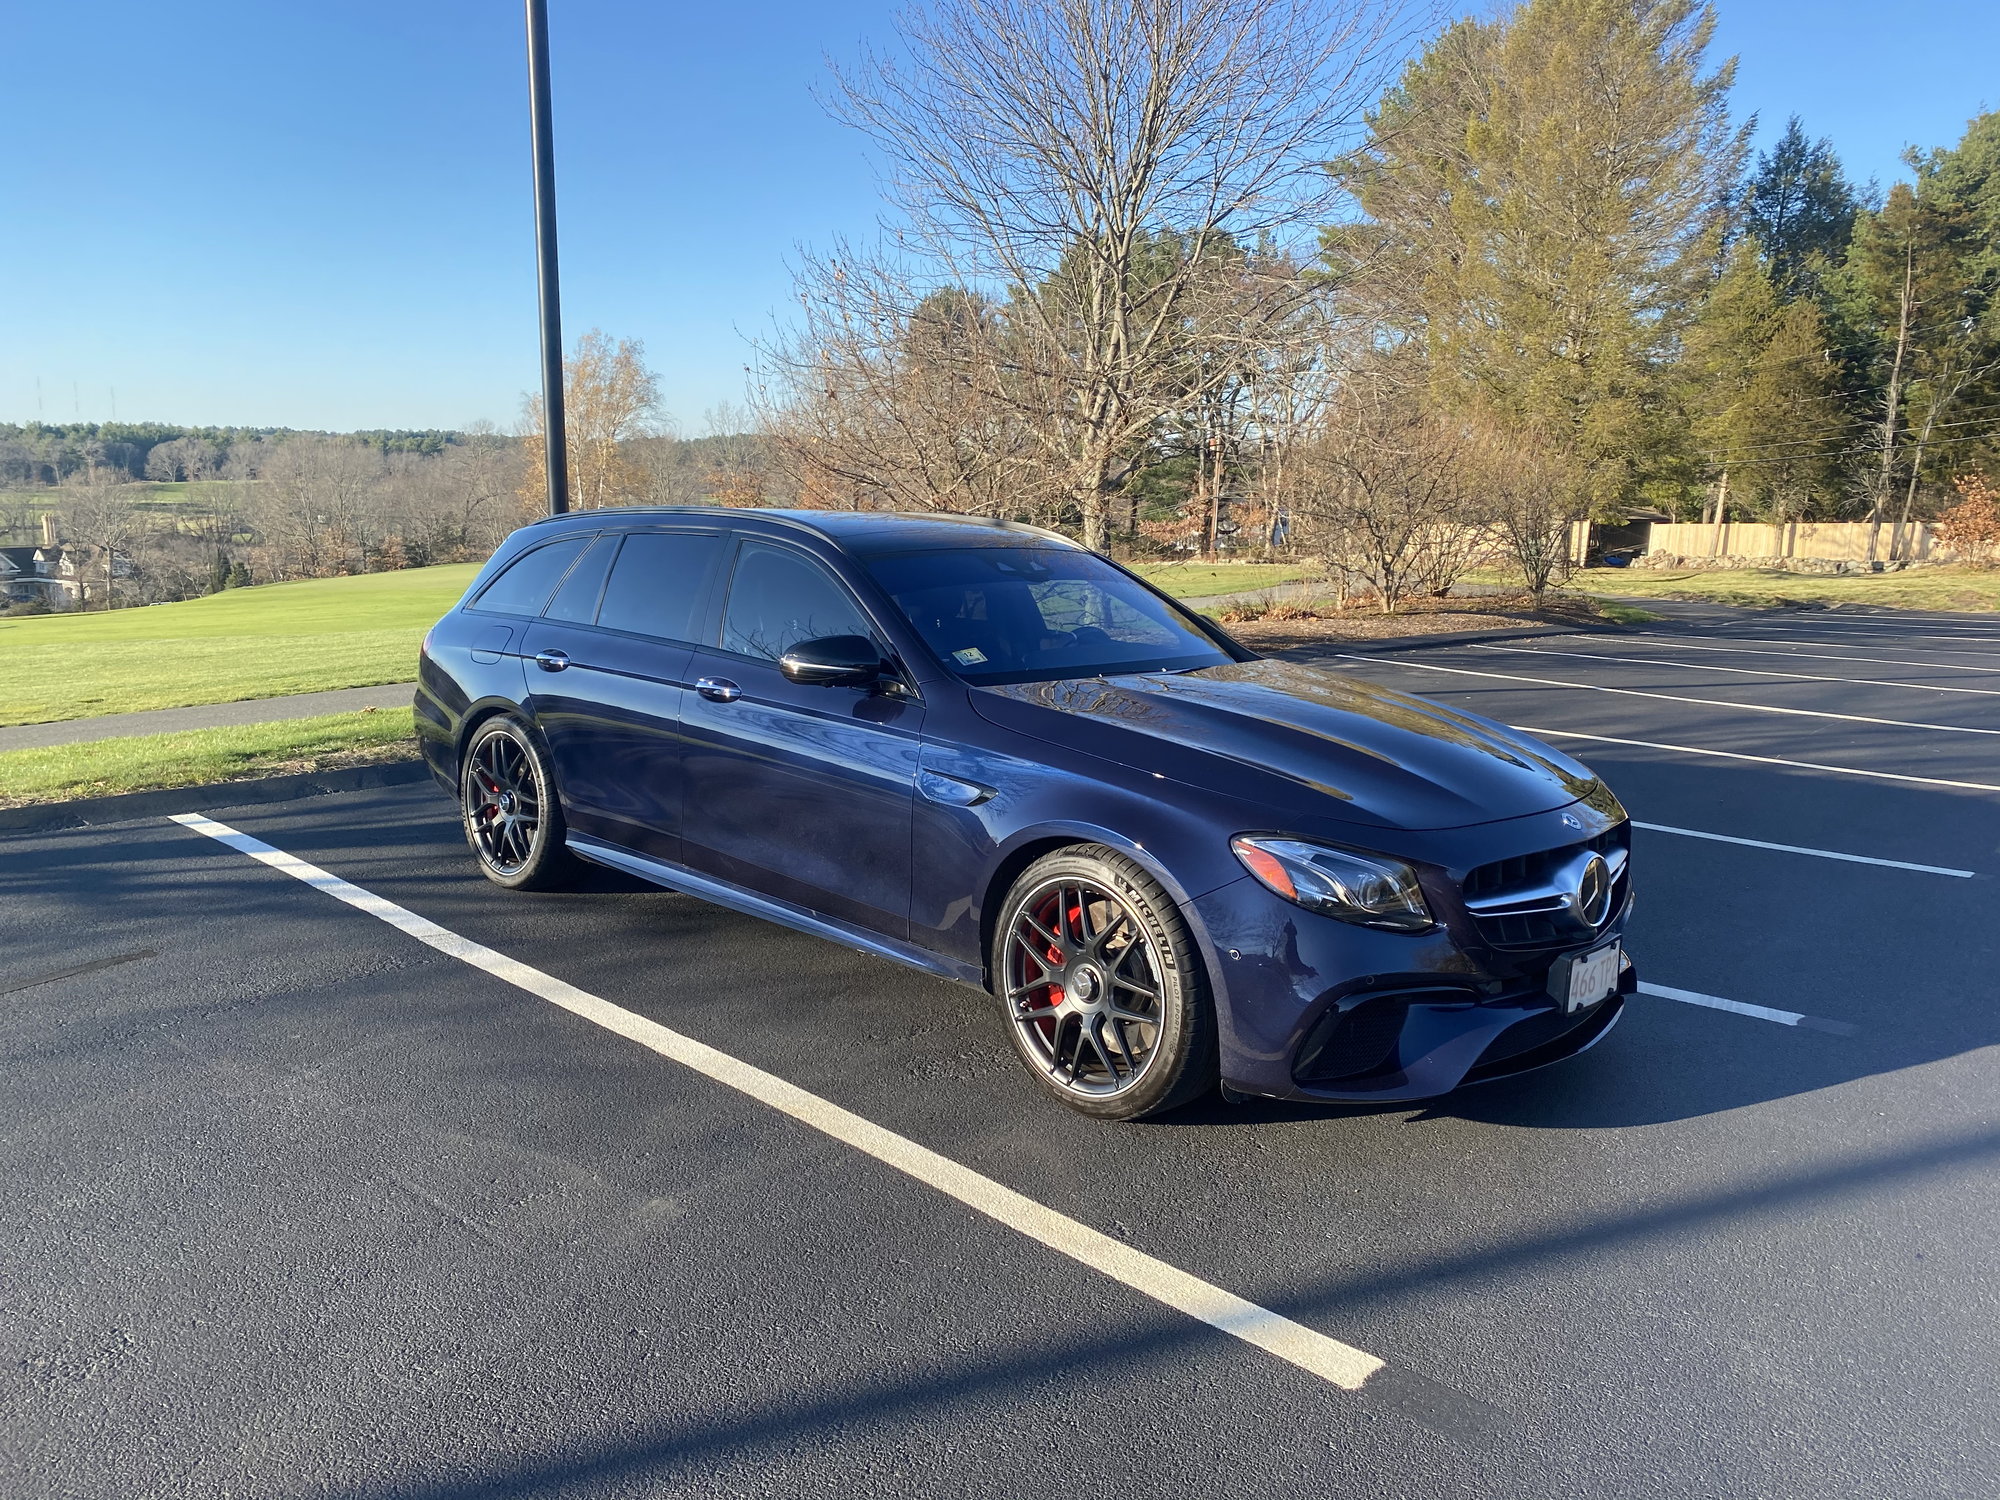 2018 E63s Wagon For Sale Mbworld Org Forums